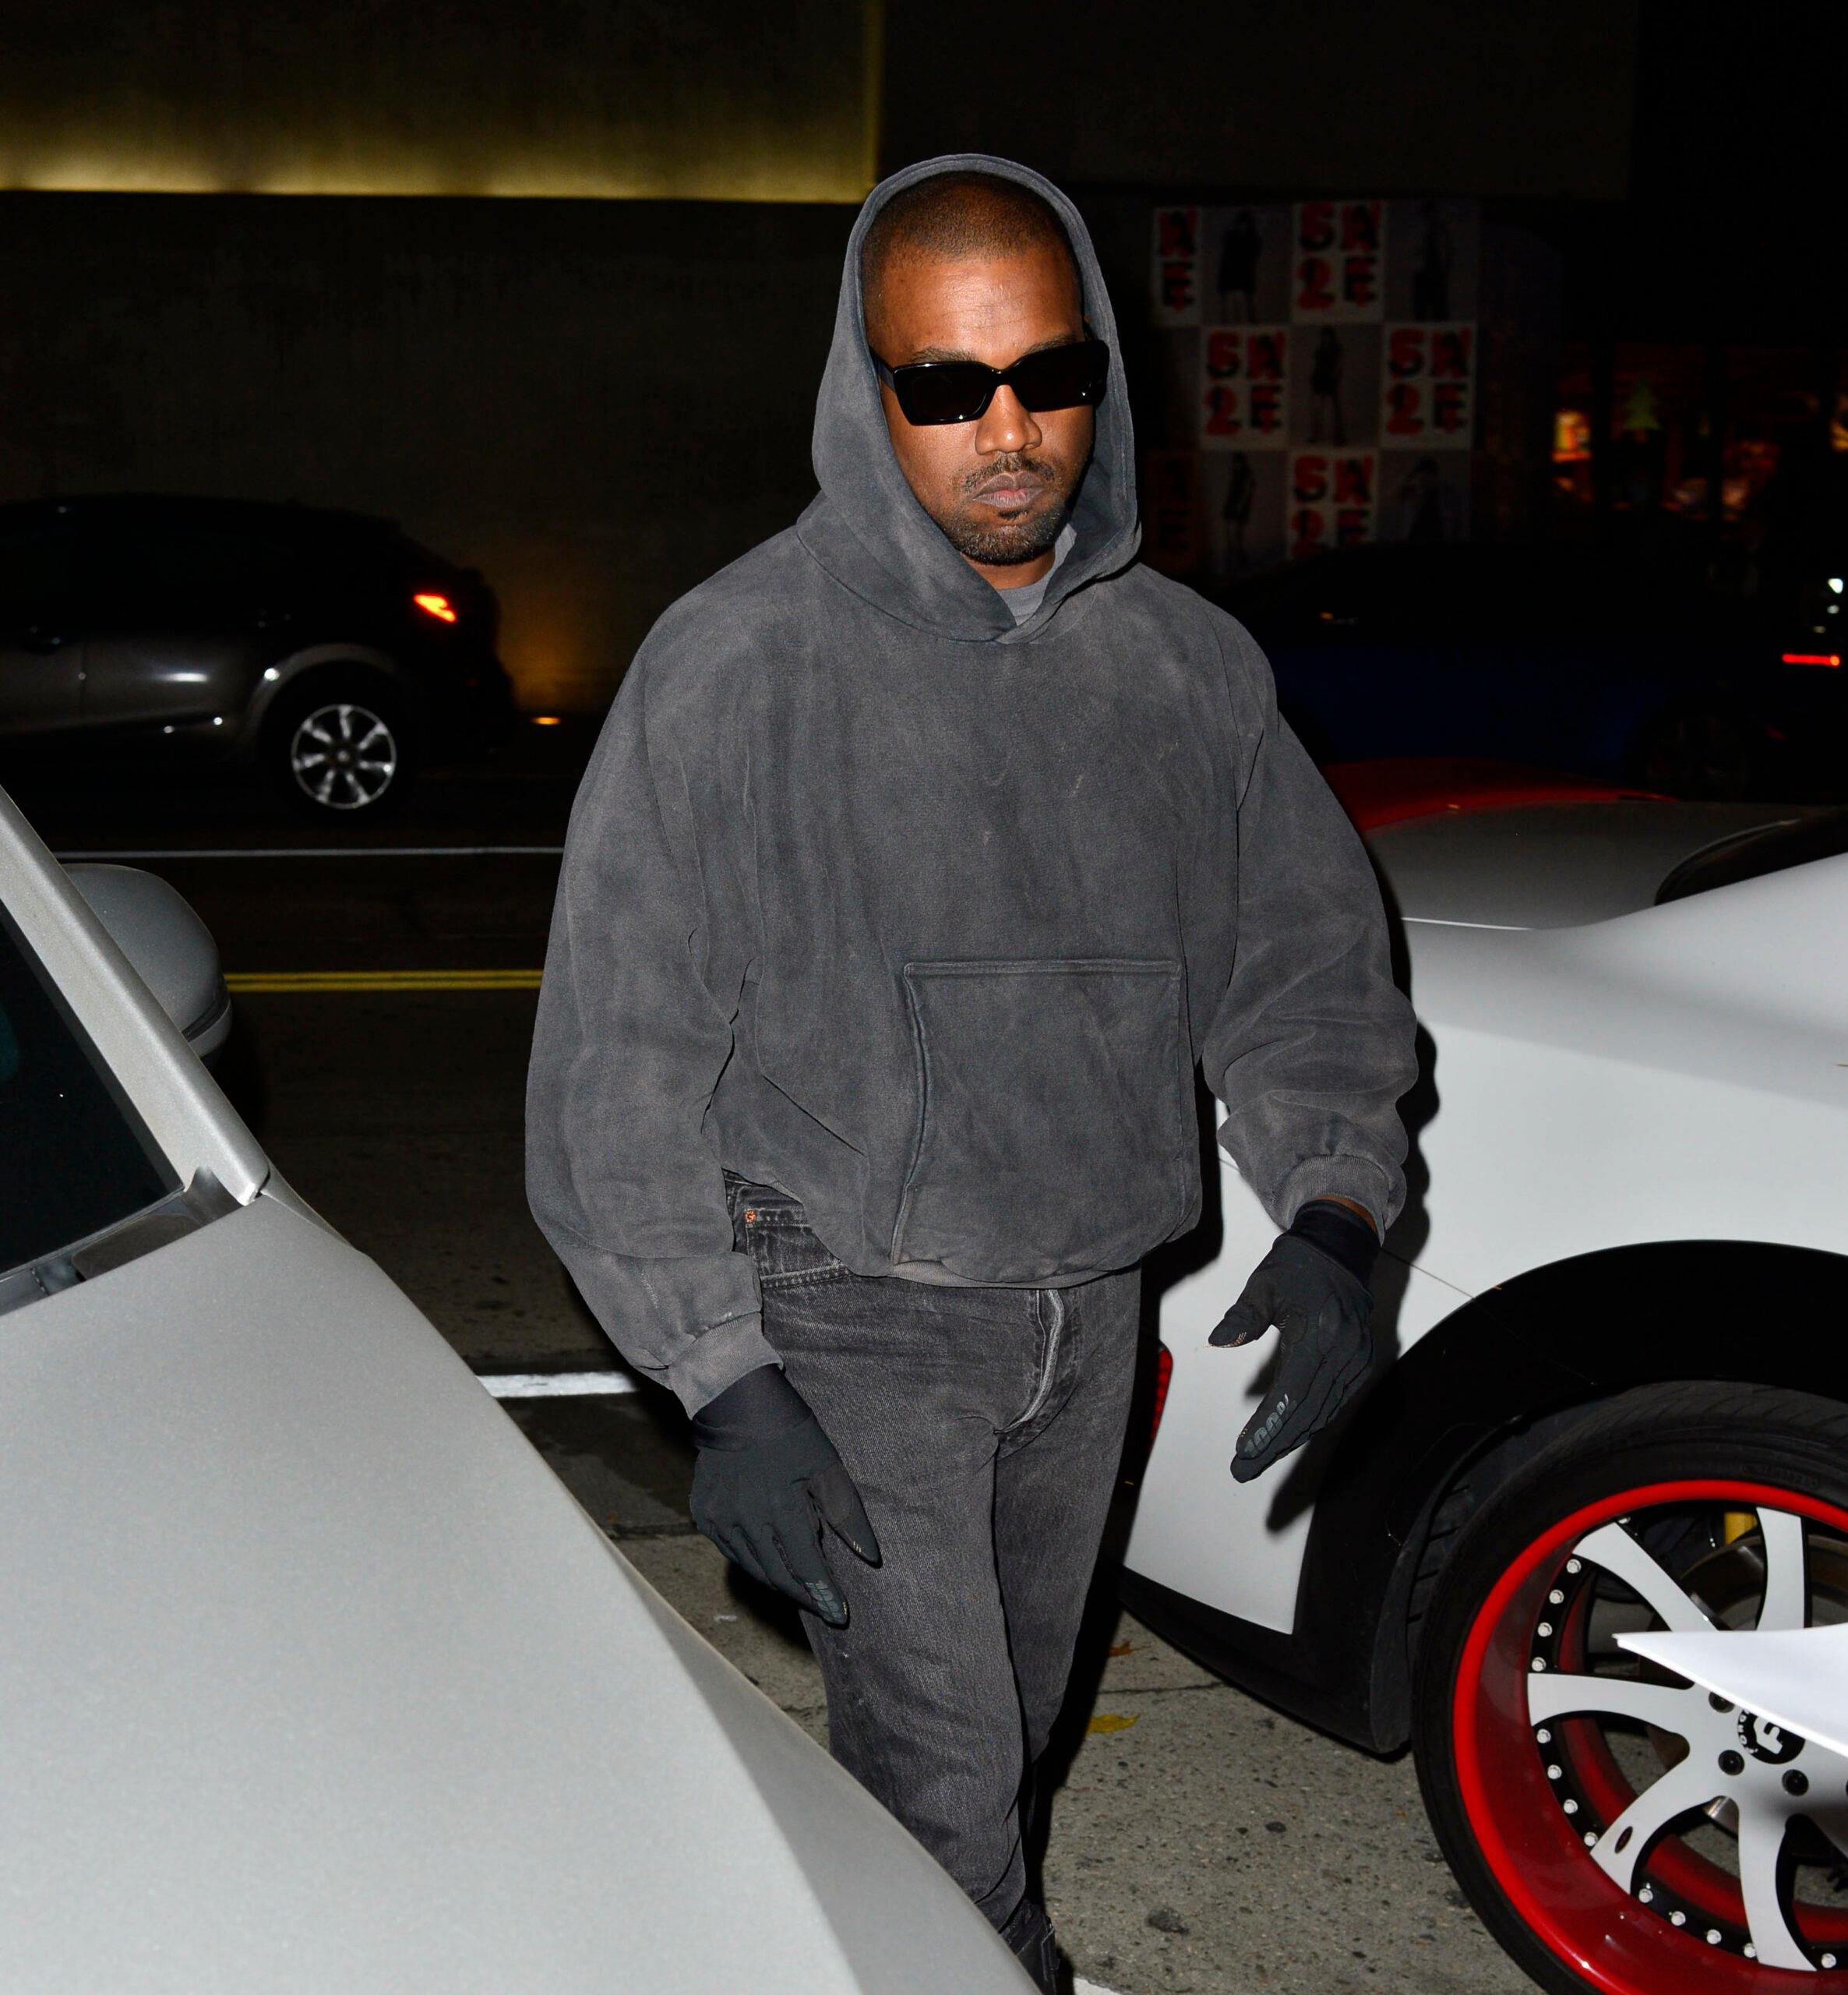 Kanye "Ye" West sighted in Los Angeles